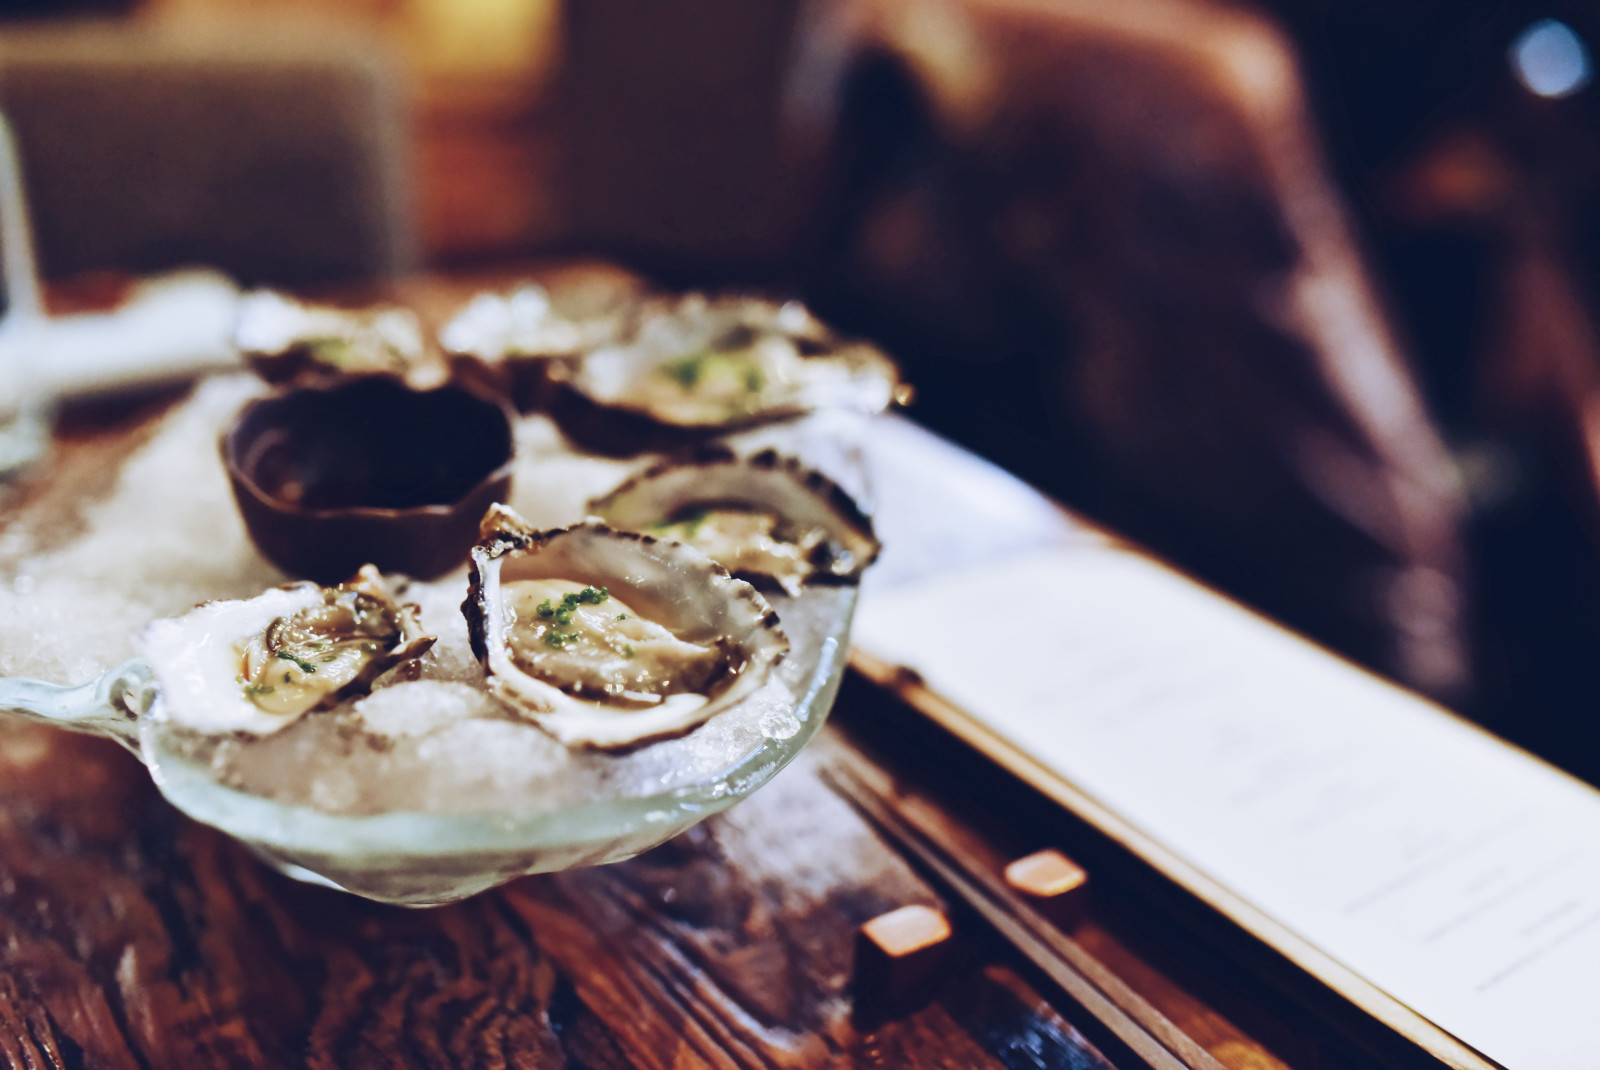 Oysters in a glass dish on a wooden table